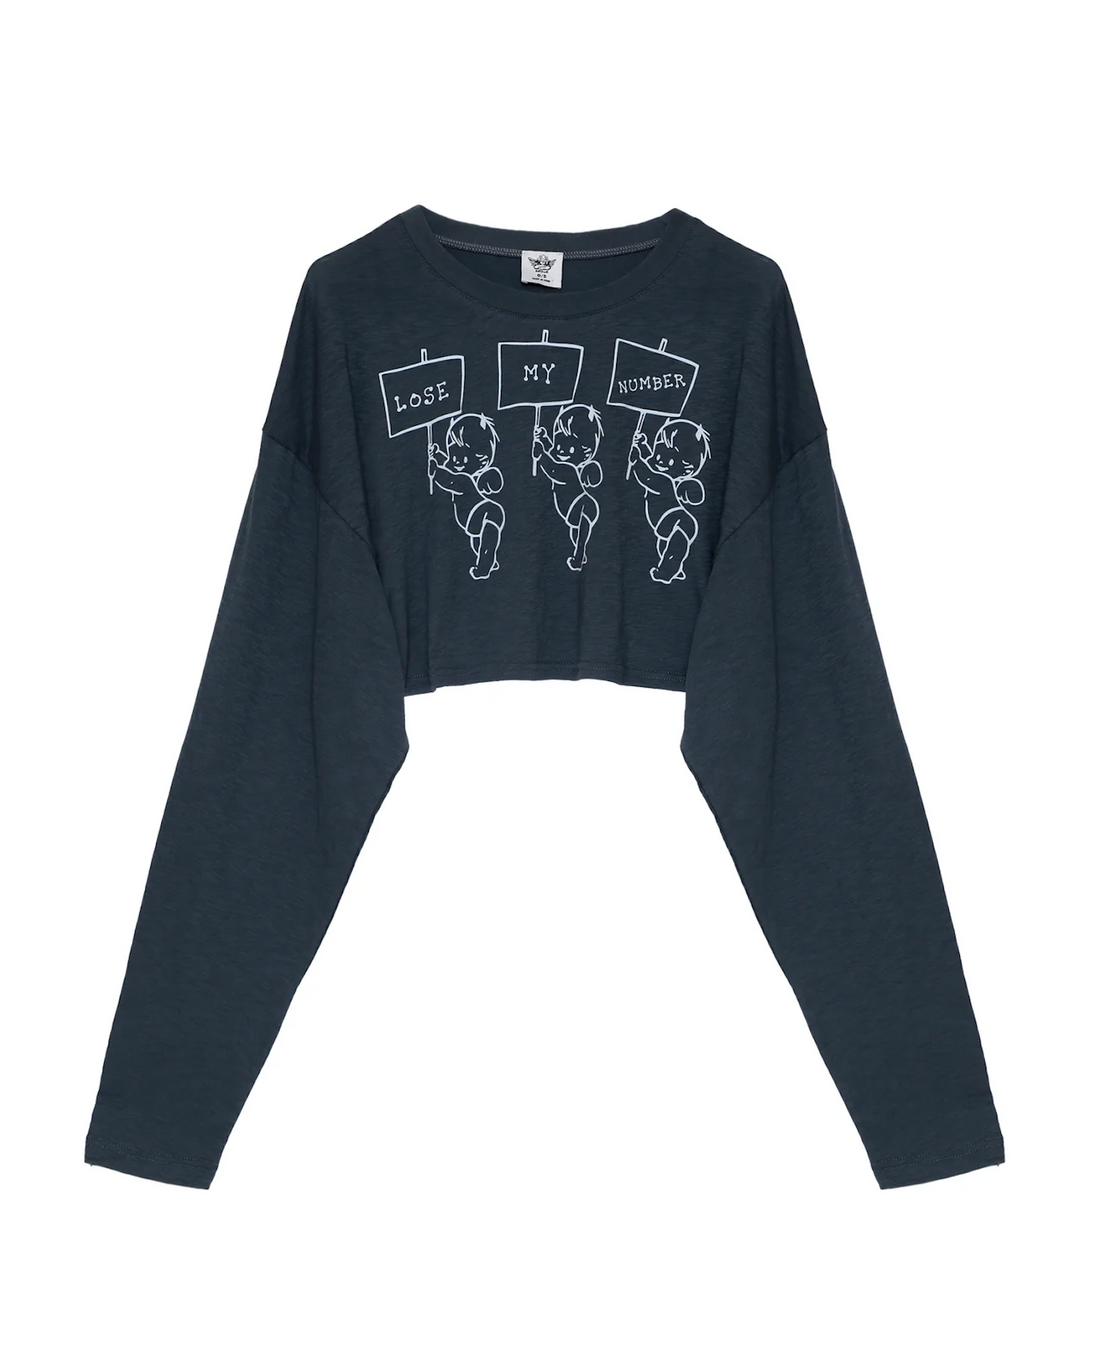 Read the Signs Cropped BF Longsleeve